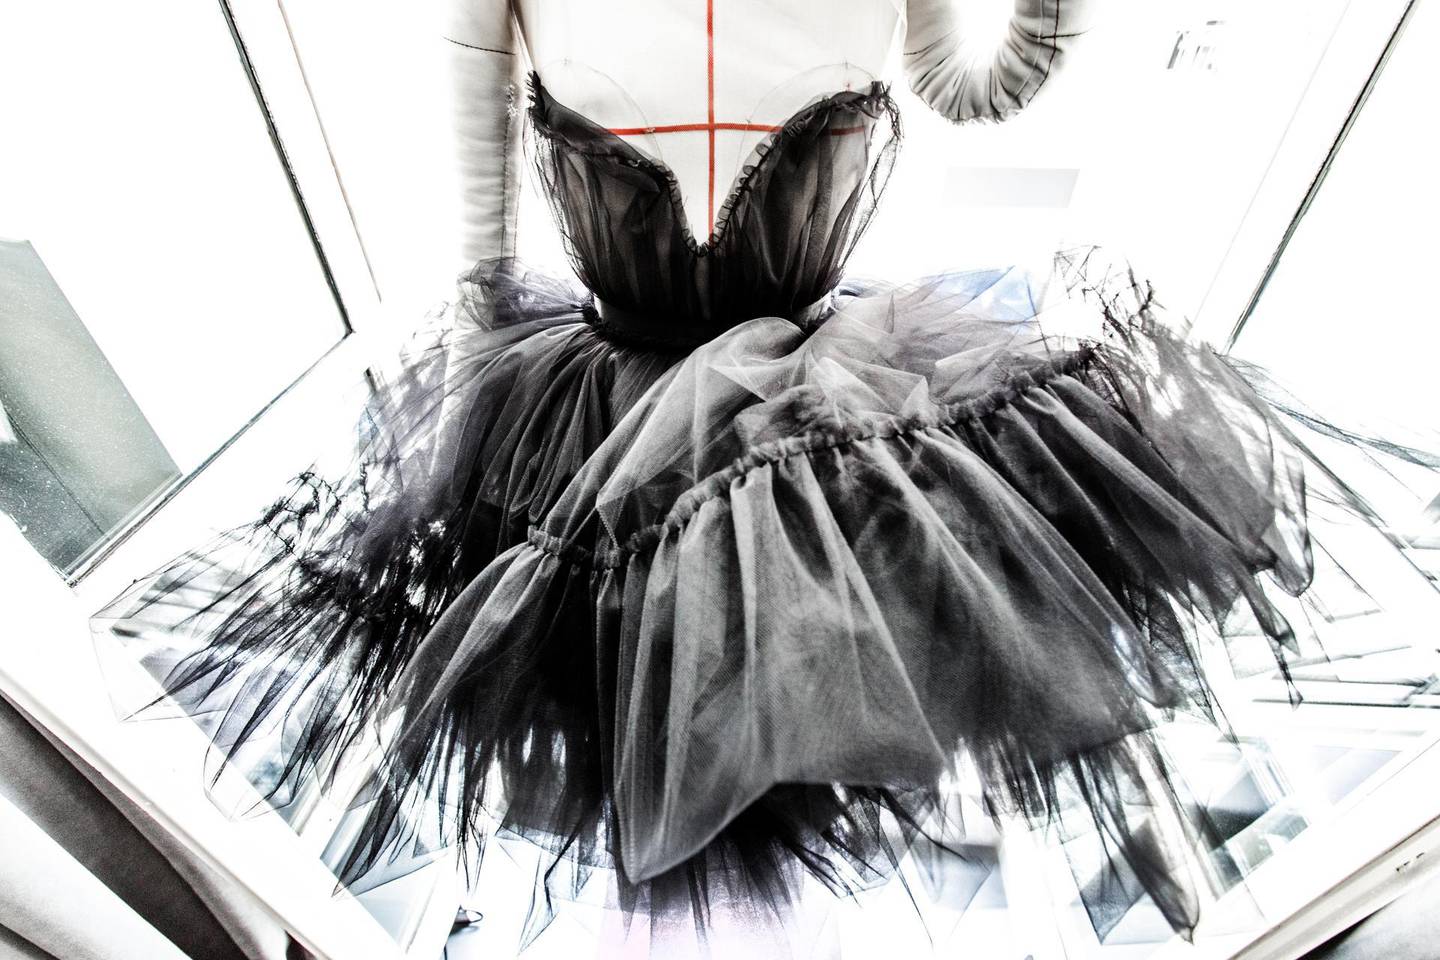 A handout photo of "Work in progress on a tulle dress made specially for the exhibition by the Lanvin ateliers" for Alber Elbaz / Lanvin Manifesto photo exhibition which will take place at the Maison Européenne de la Photographie in Paris (Photo by But Sou Lai) *** Local Caption ***  BLOG24jl-lanvin-exhibit02.jpg